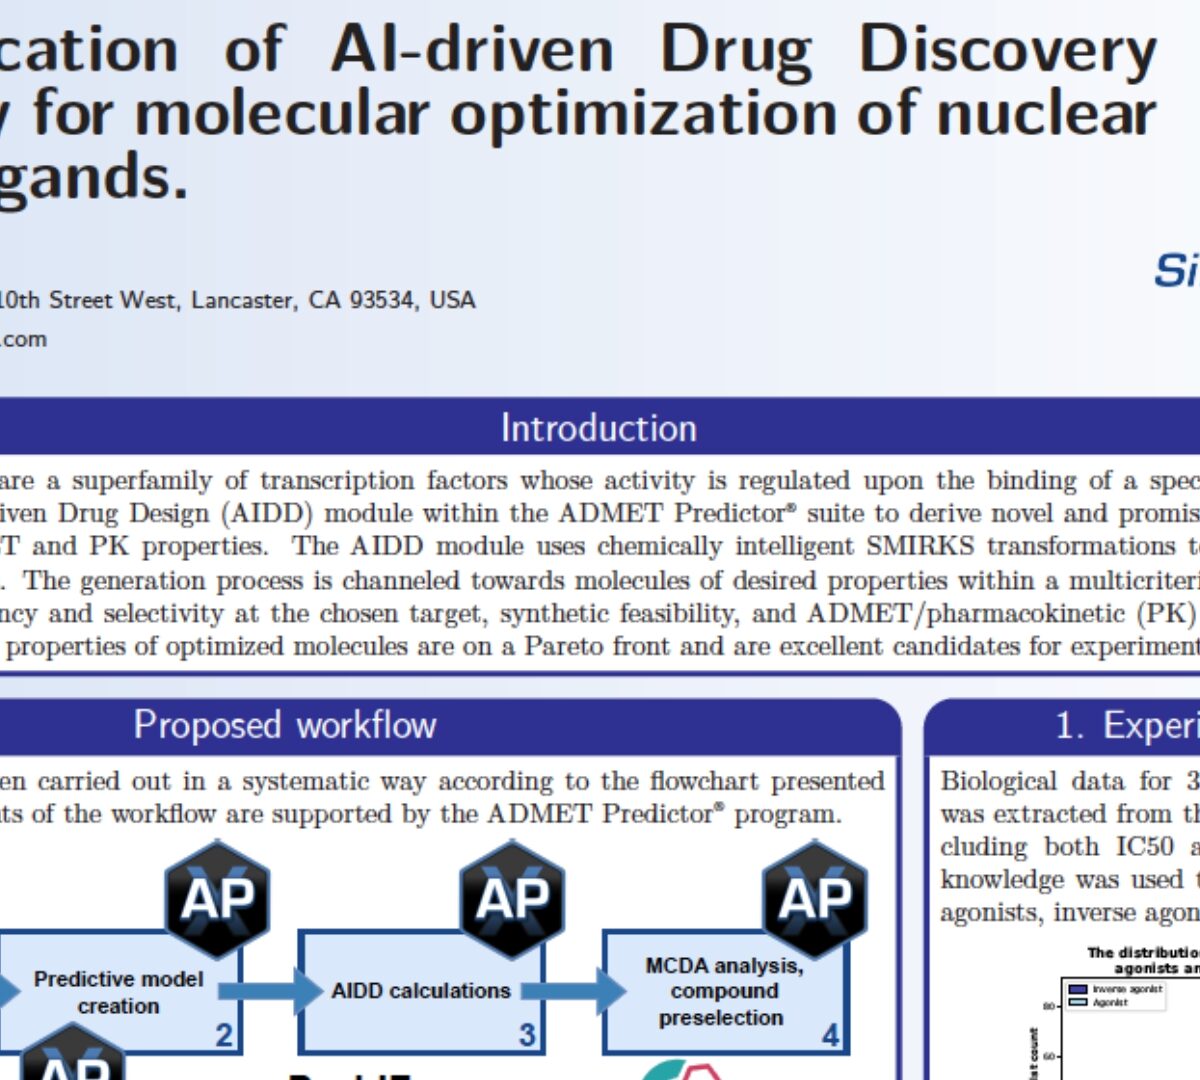 The application of AI-driven Drug Discovery technology for molecular optimization of nuclear receptor ligands